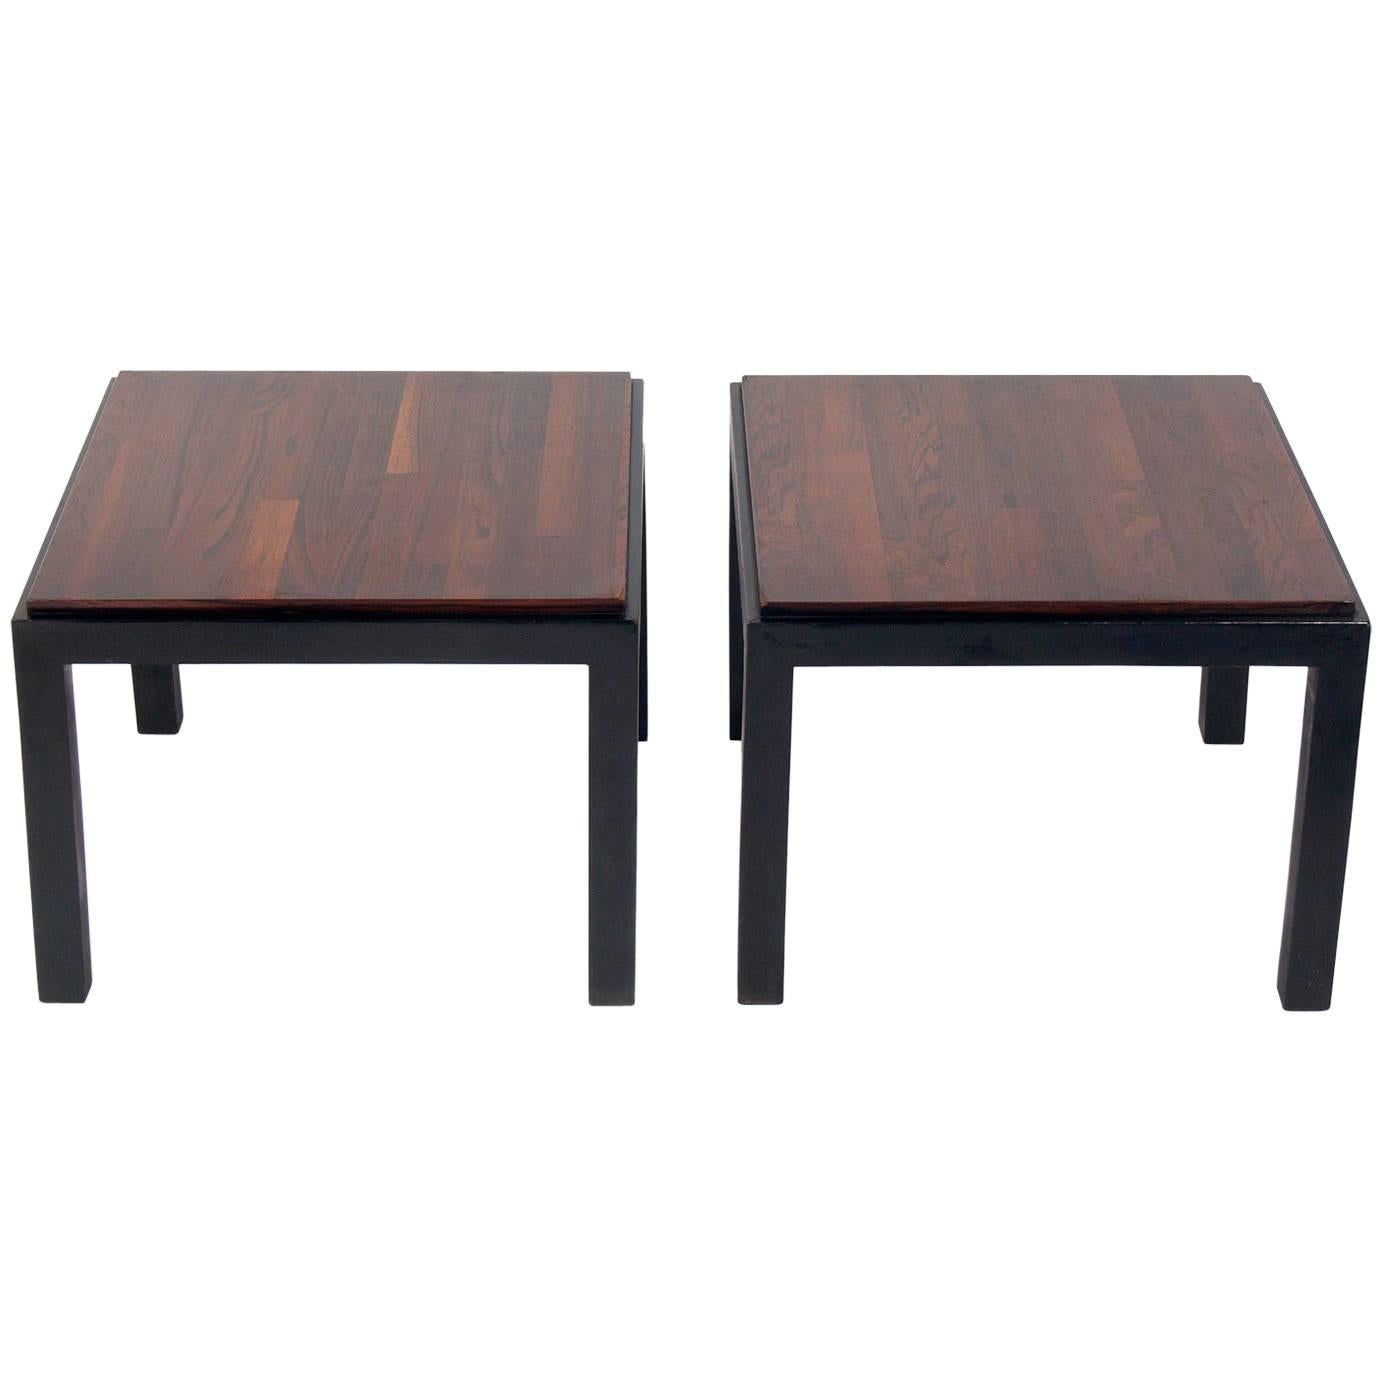 Pair of Rosewood and Black Lacquer End Tables by Milo Baughman